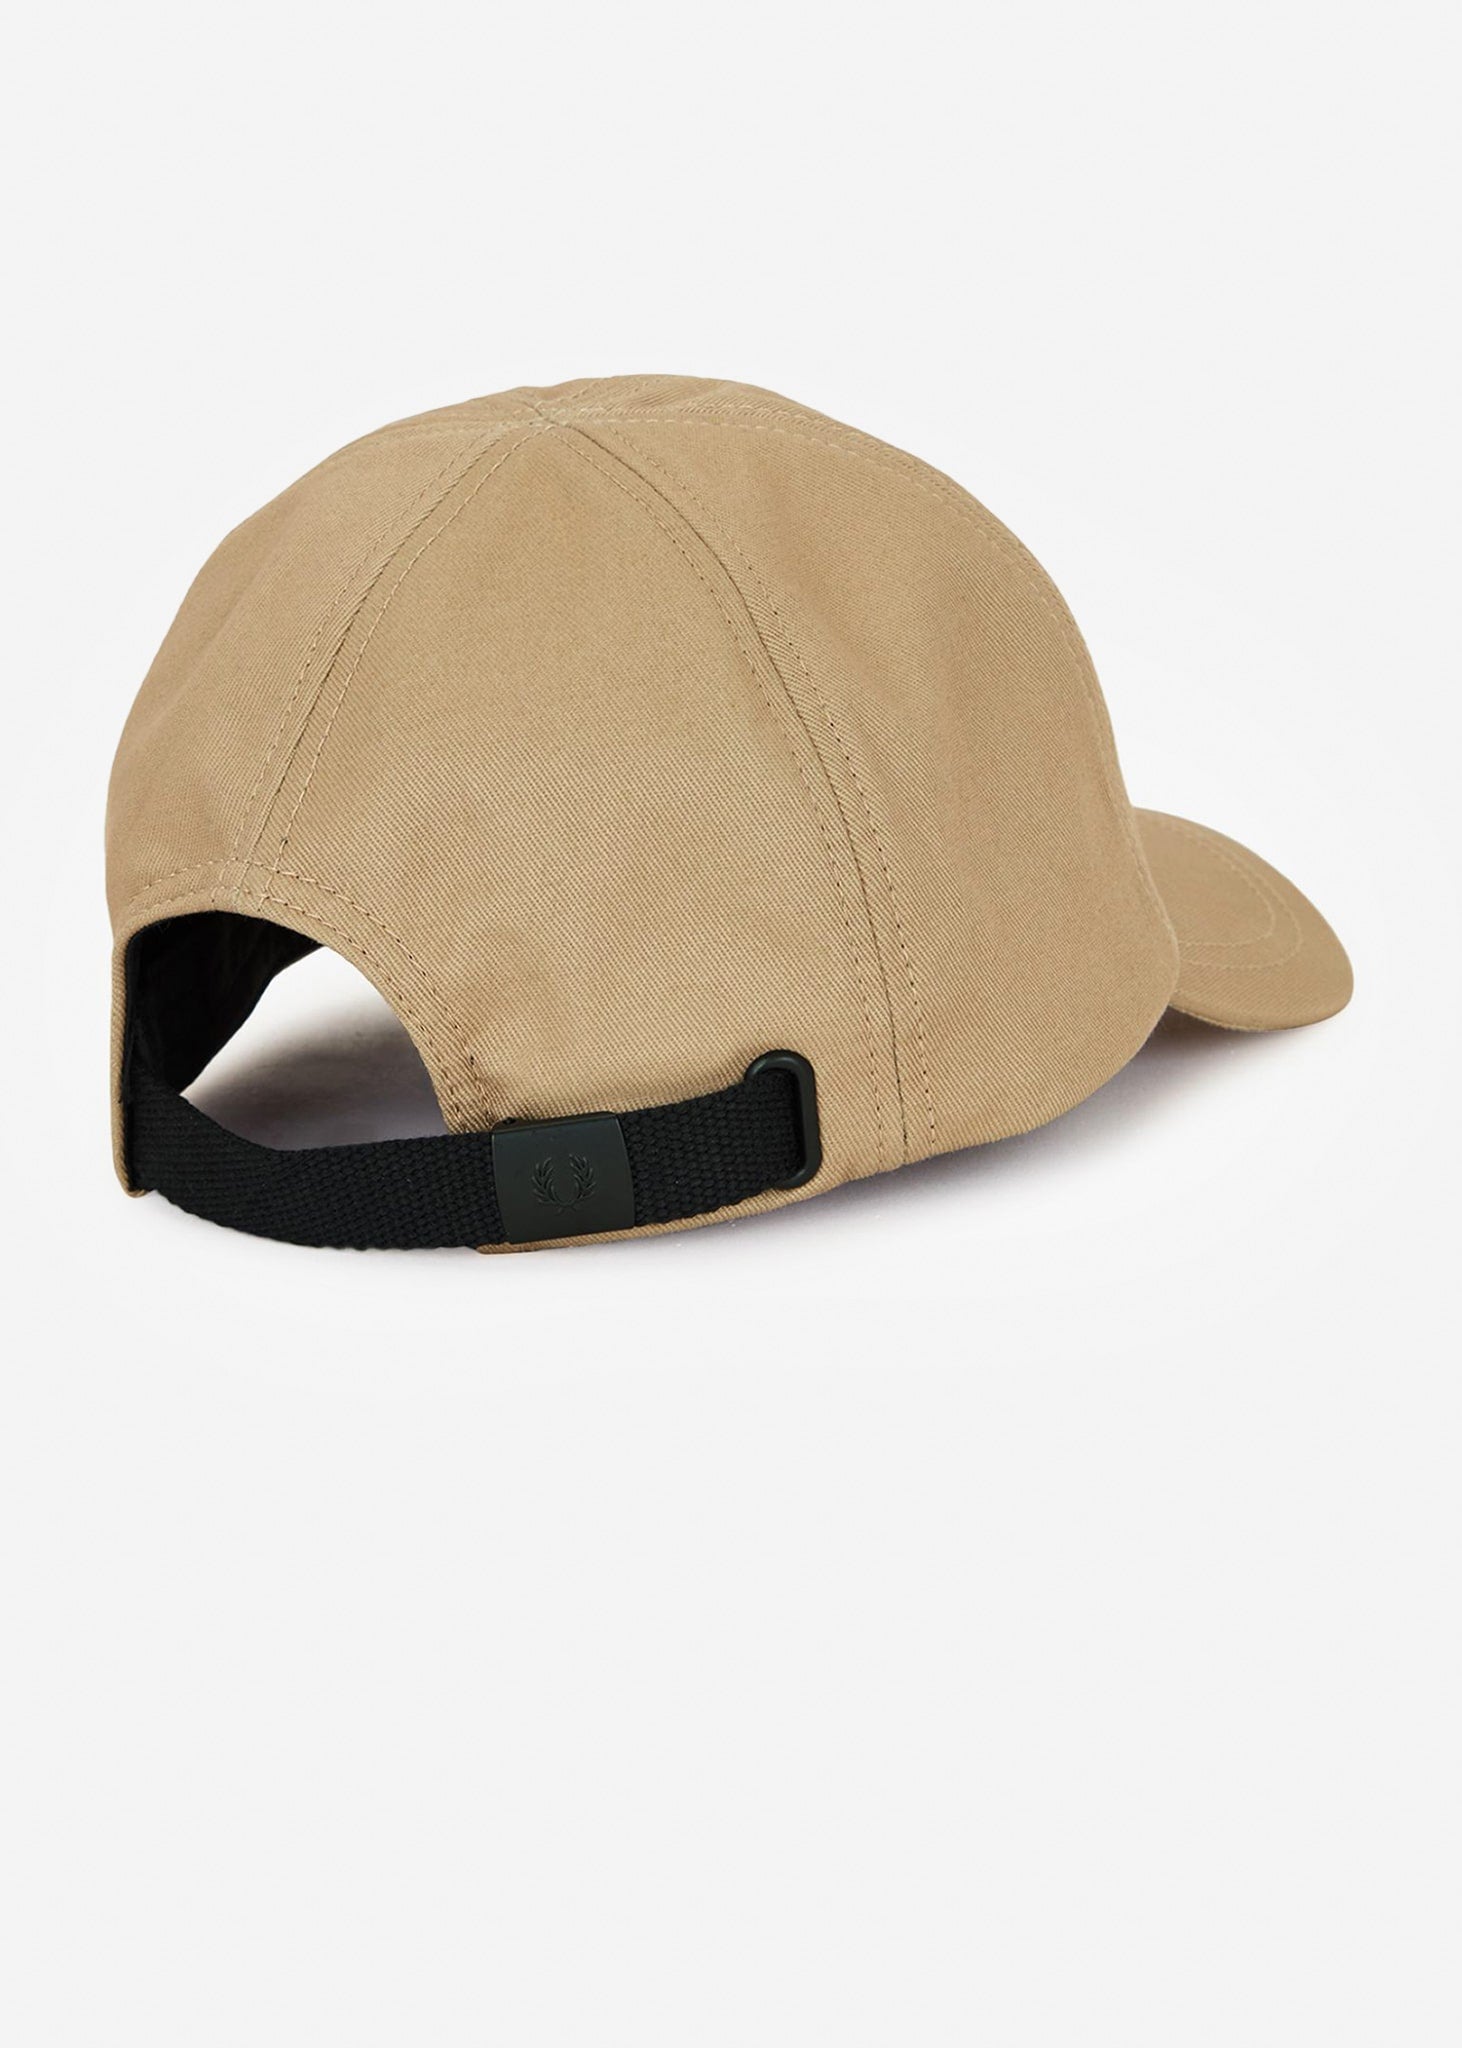 Fred Perry Petten  Graphic branded twill cap - warm stone 